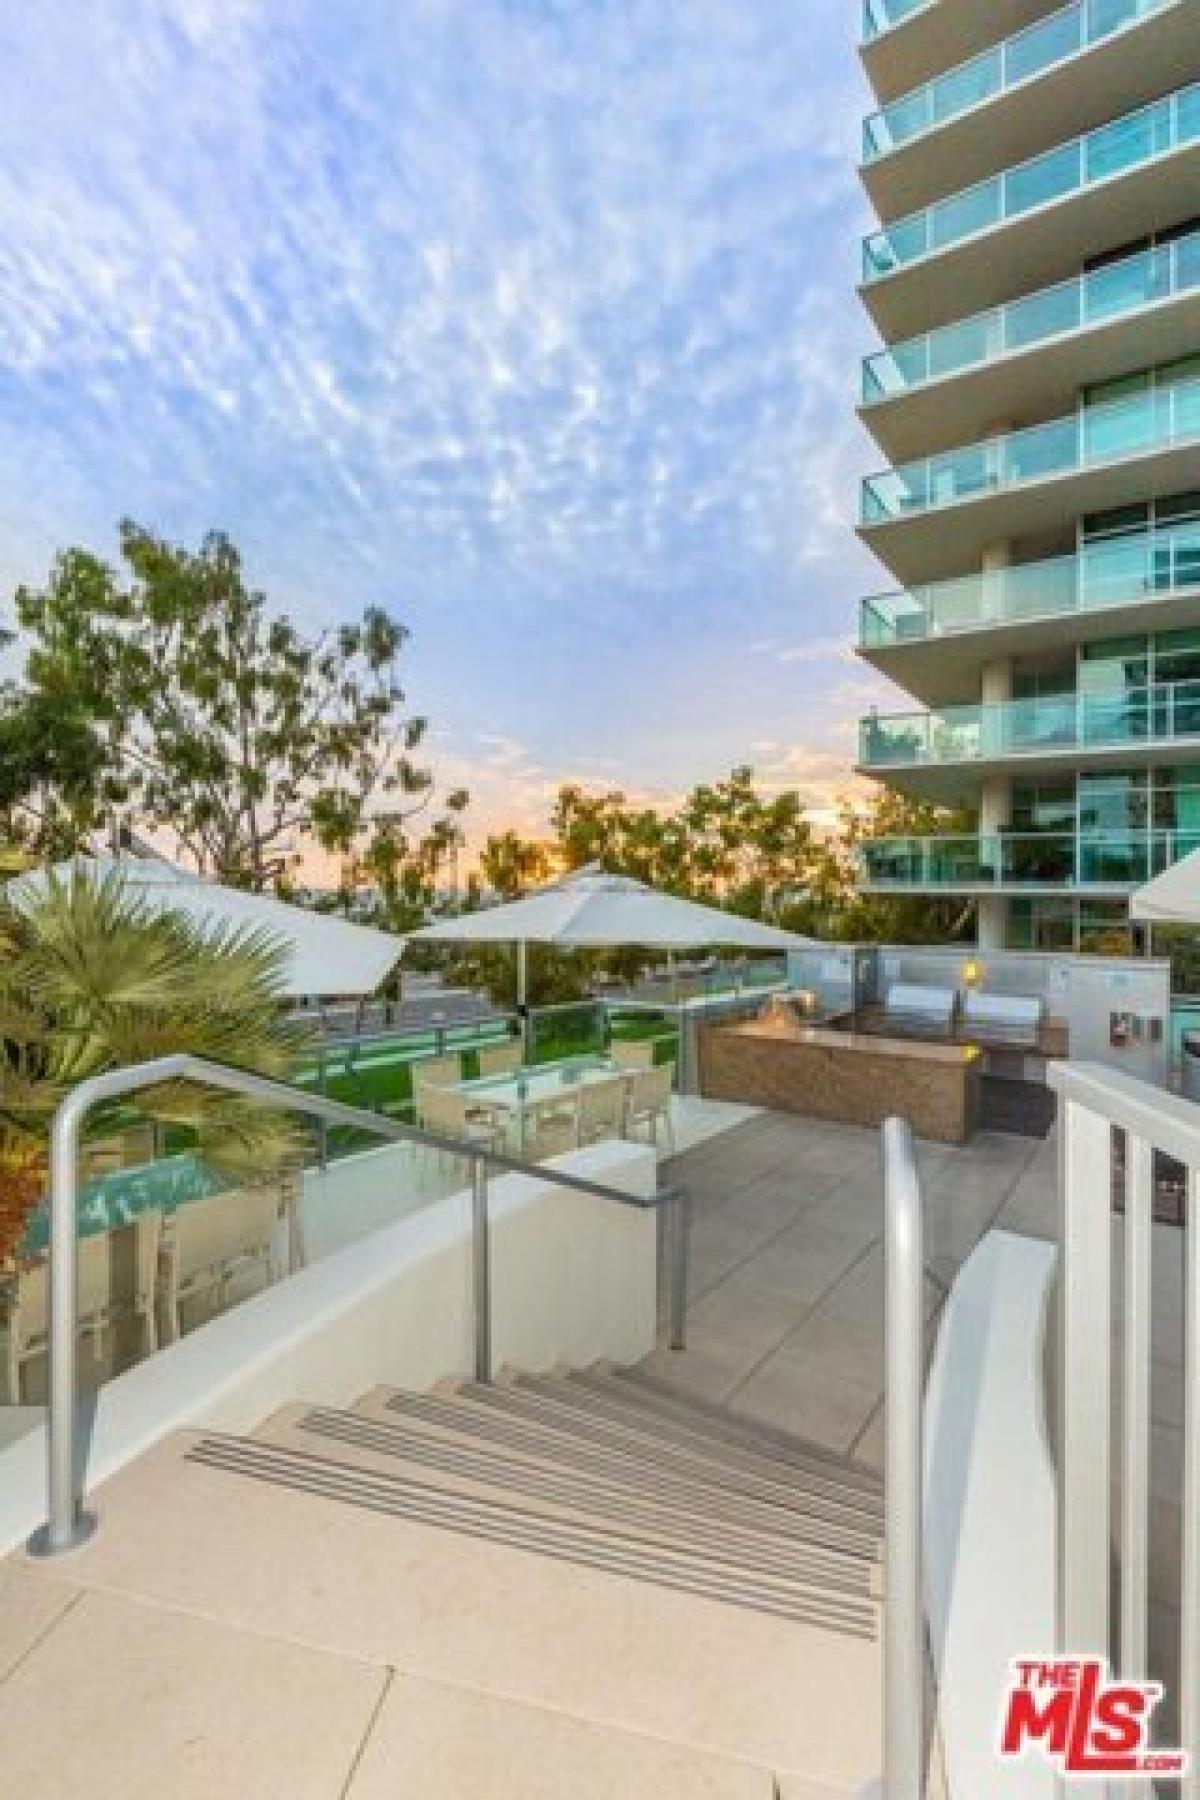 Picture of Home For Sale in Marina del Rey, California, United States